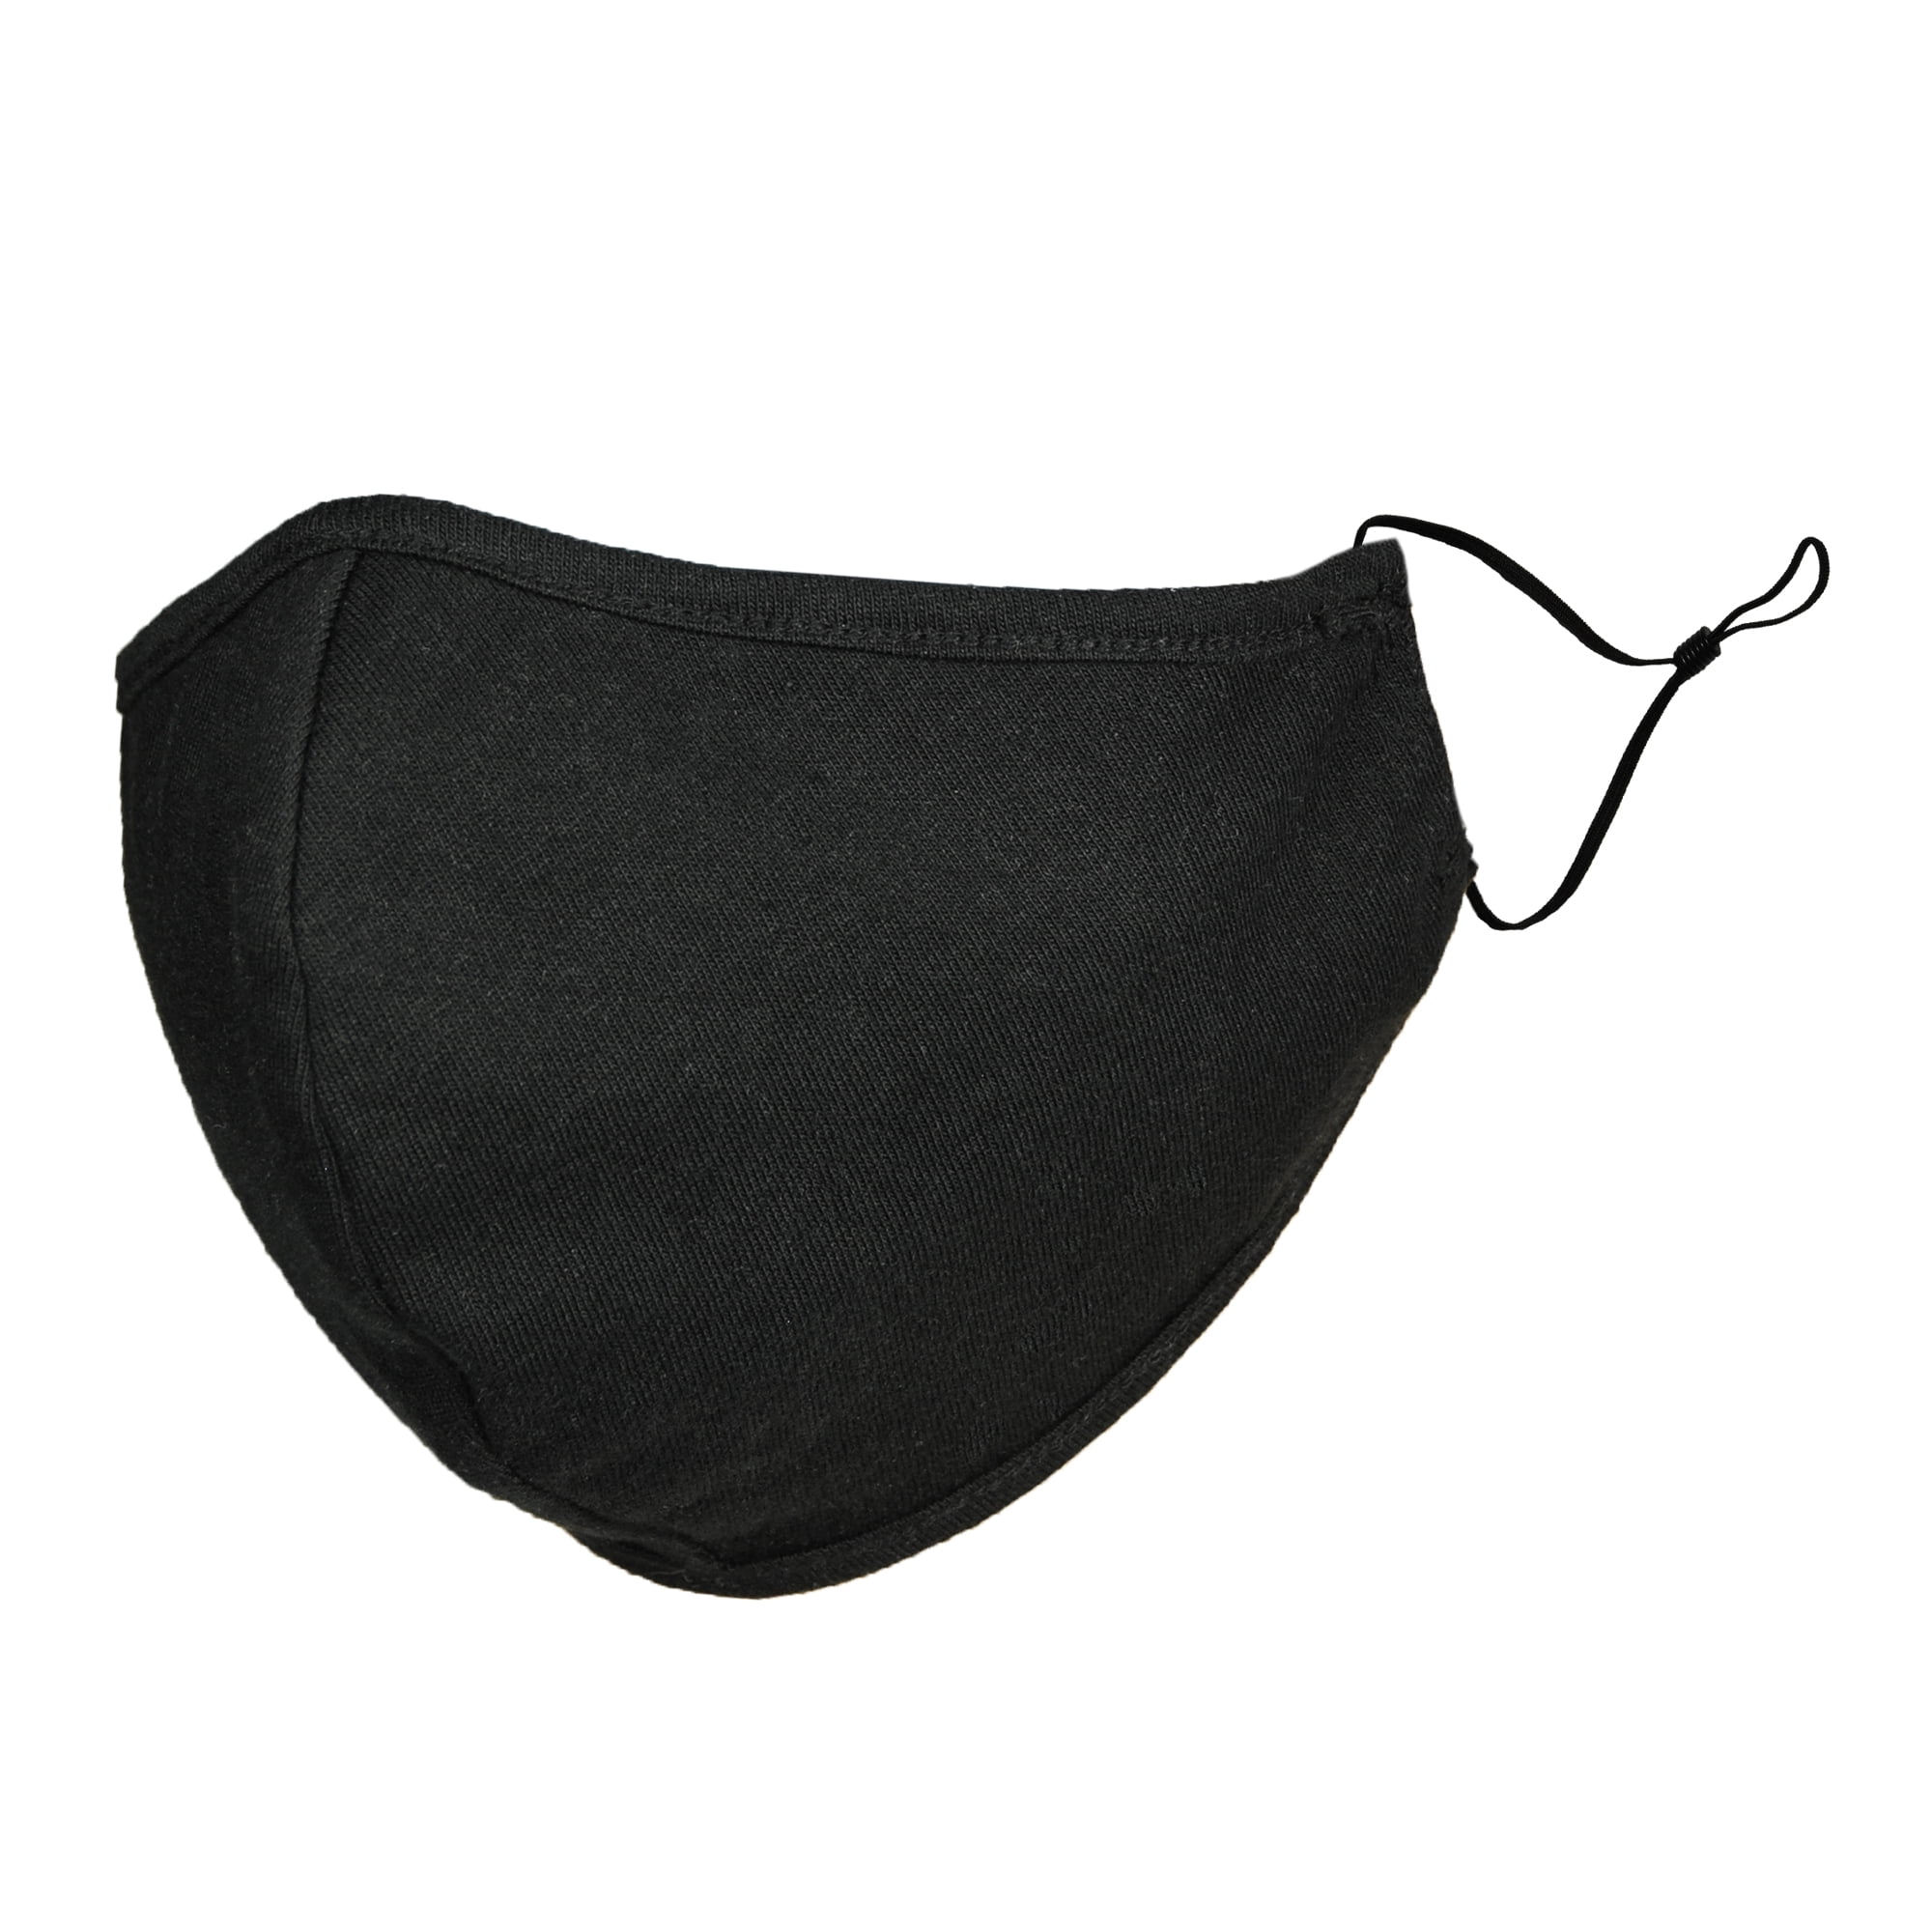 DALIX - DALIX Cloth Face Mask Reuseable Washable in Black Made in USA - L-XL Size